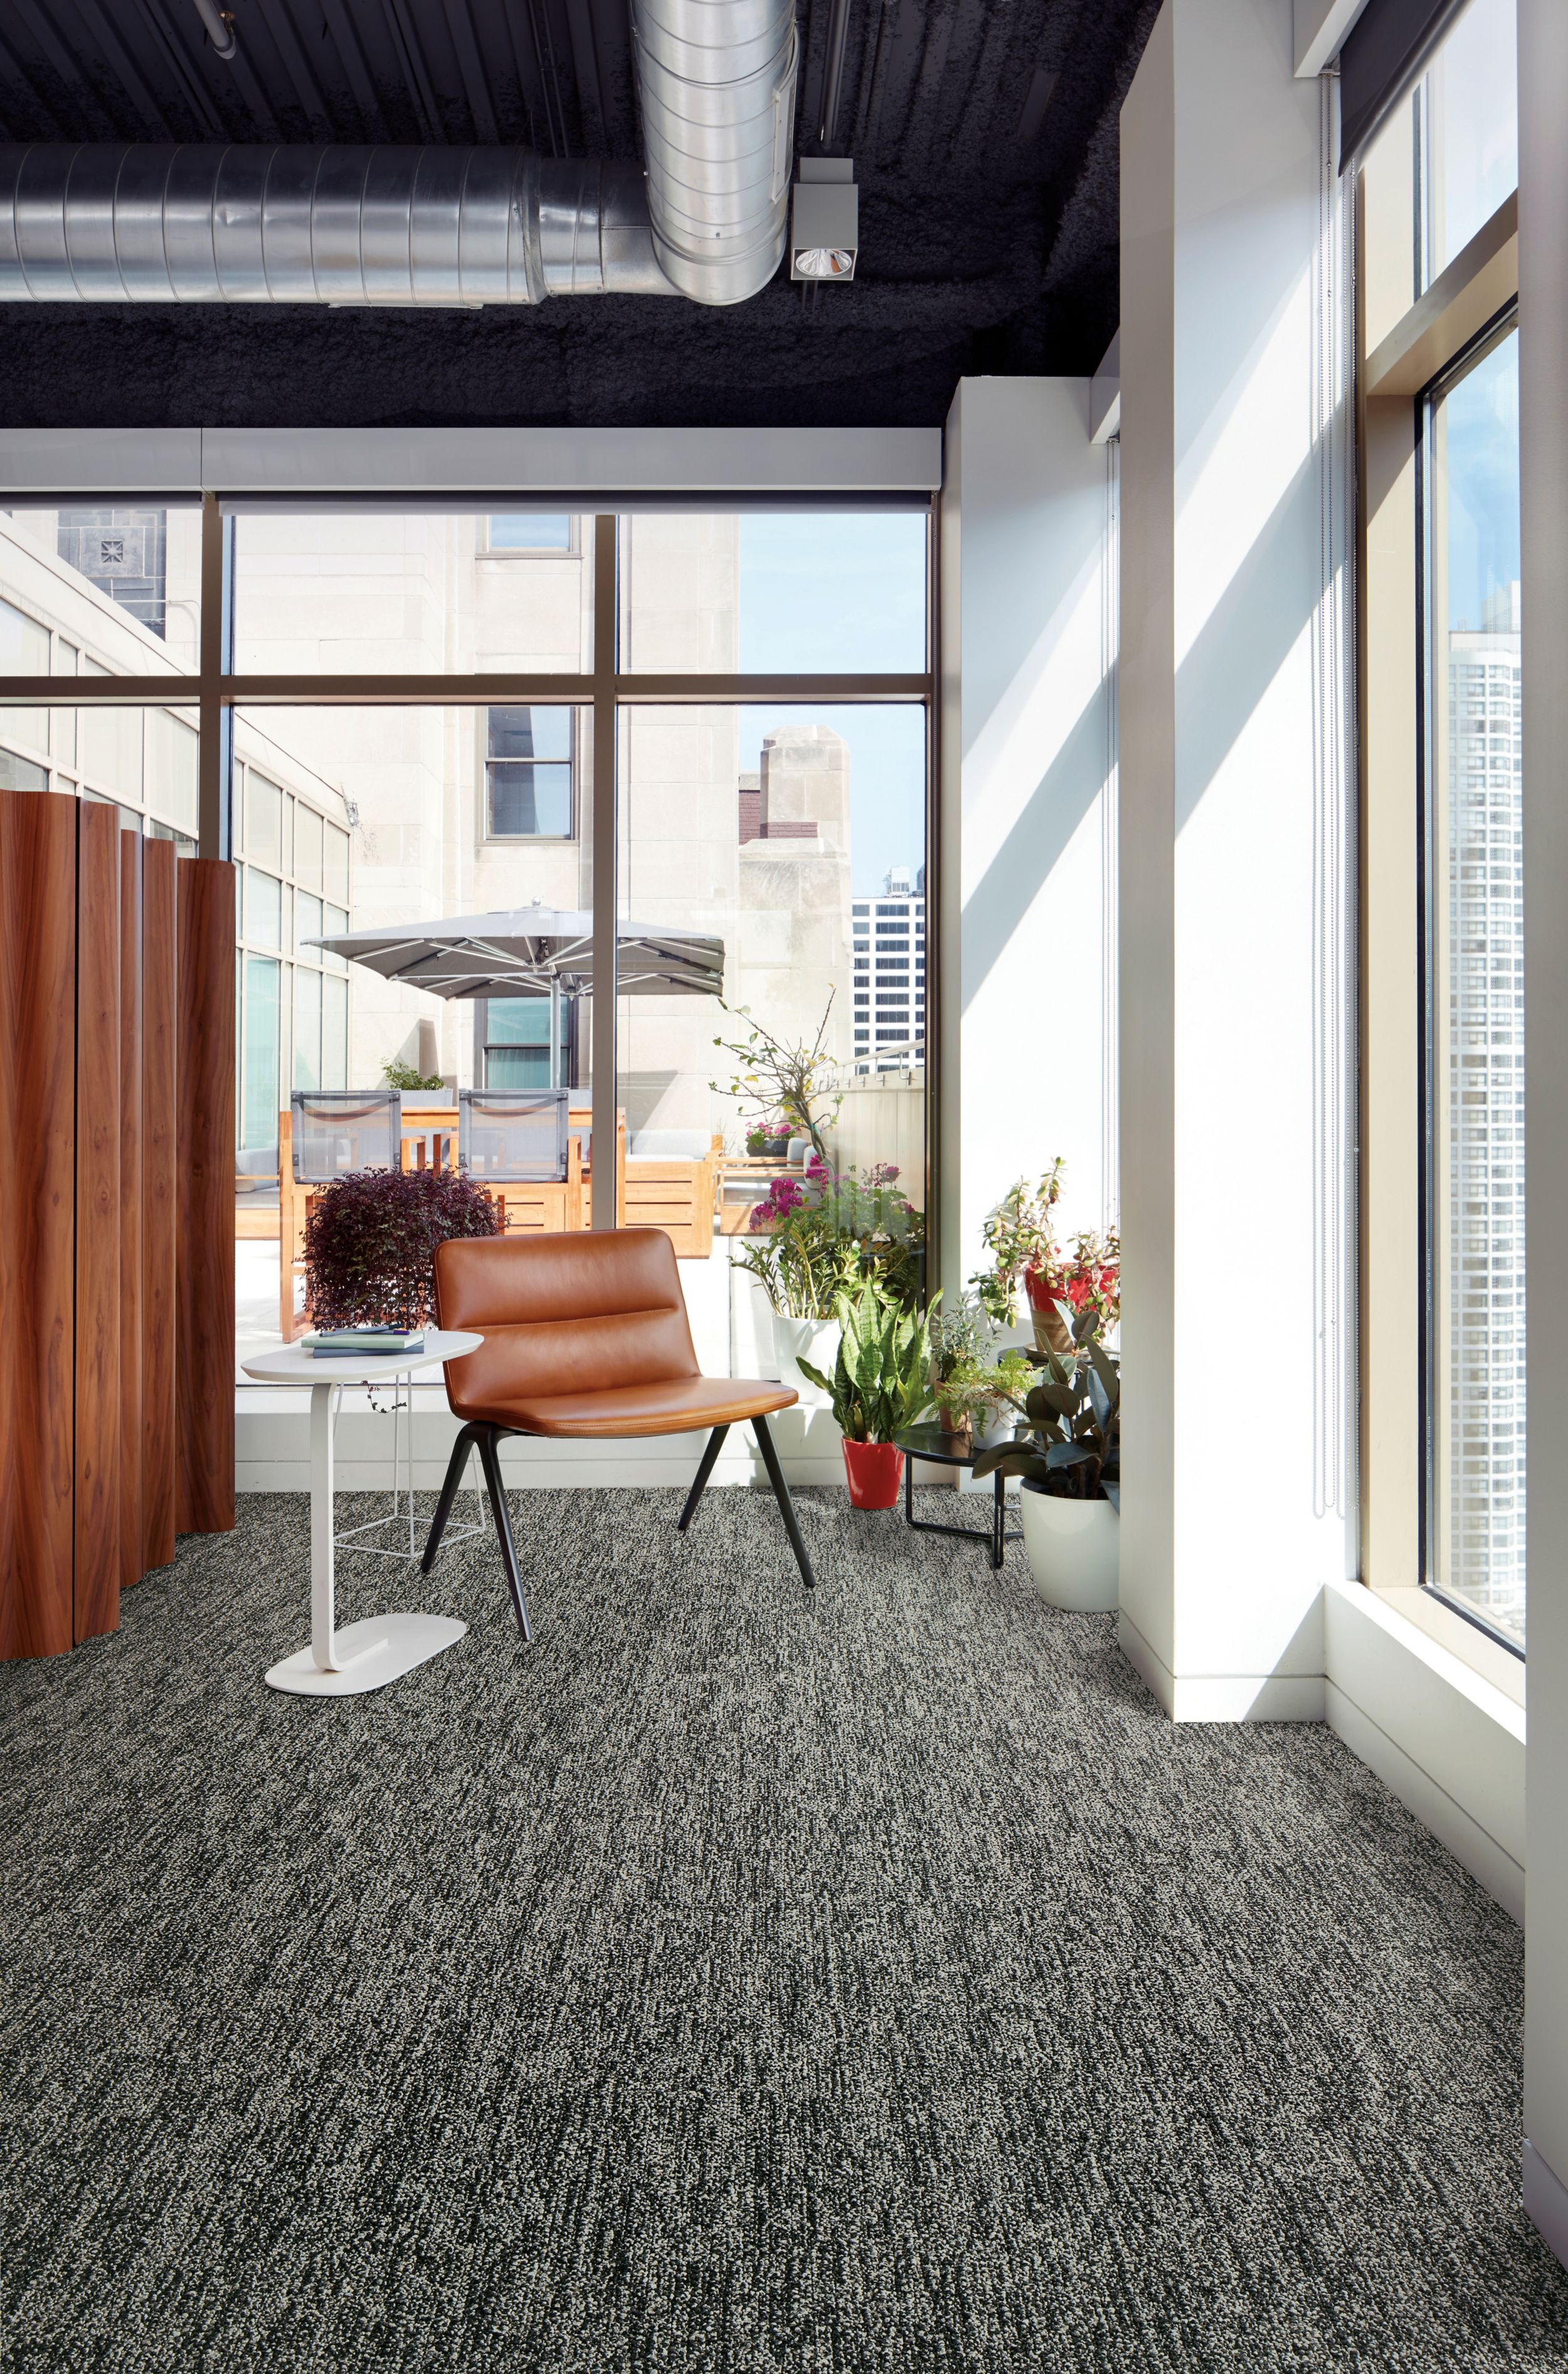 Interface Obligato plank carpet tile with leather chair and potted plants in windows image number 6